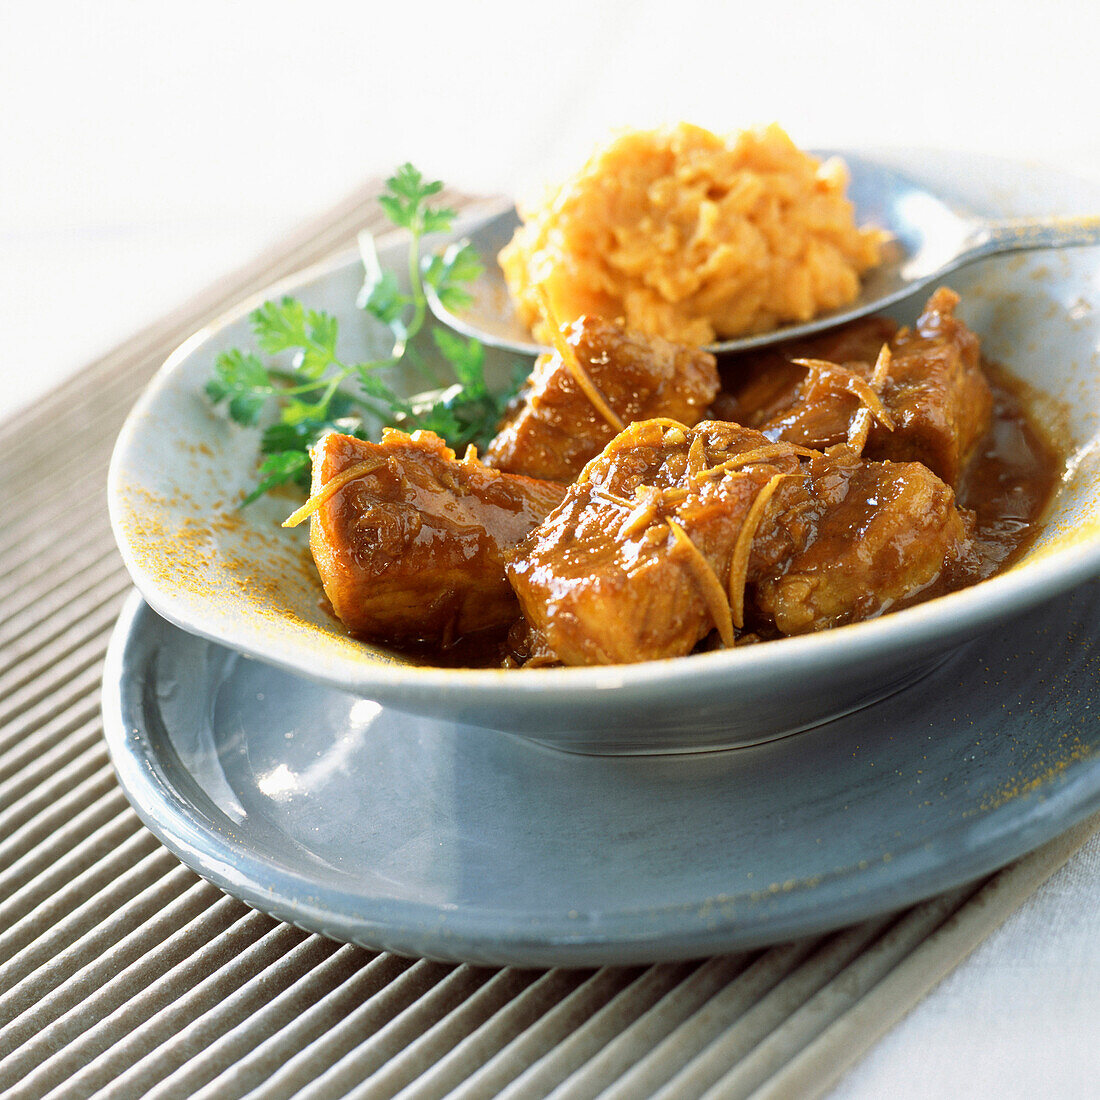 Pork colombo with sweet potato purée( topic : season dishes)